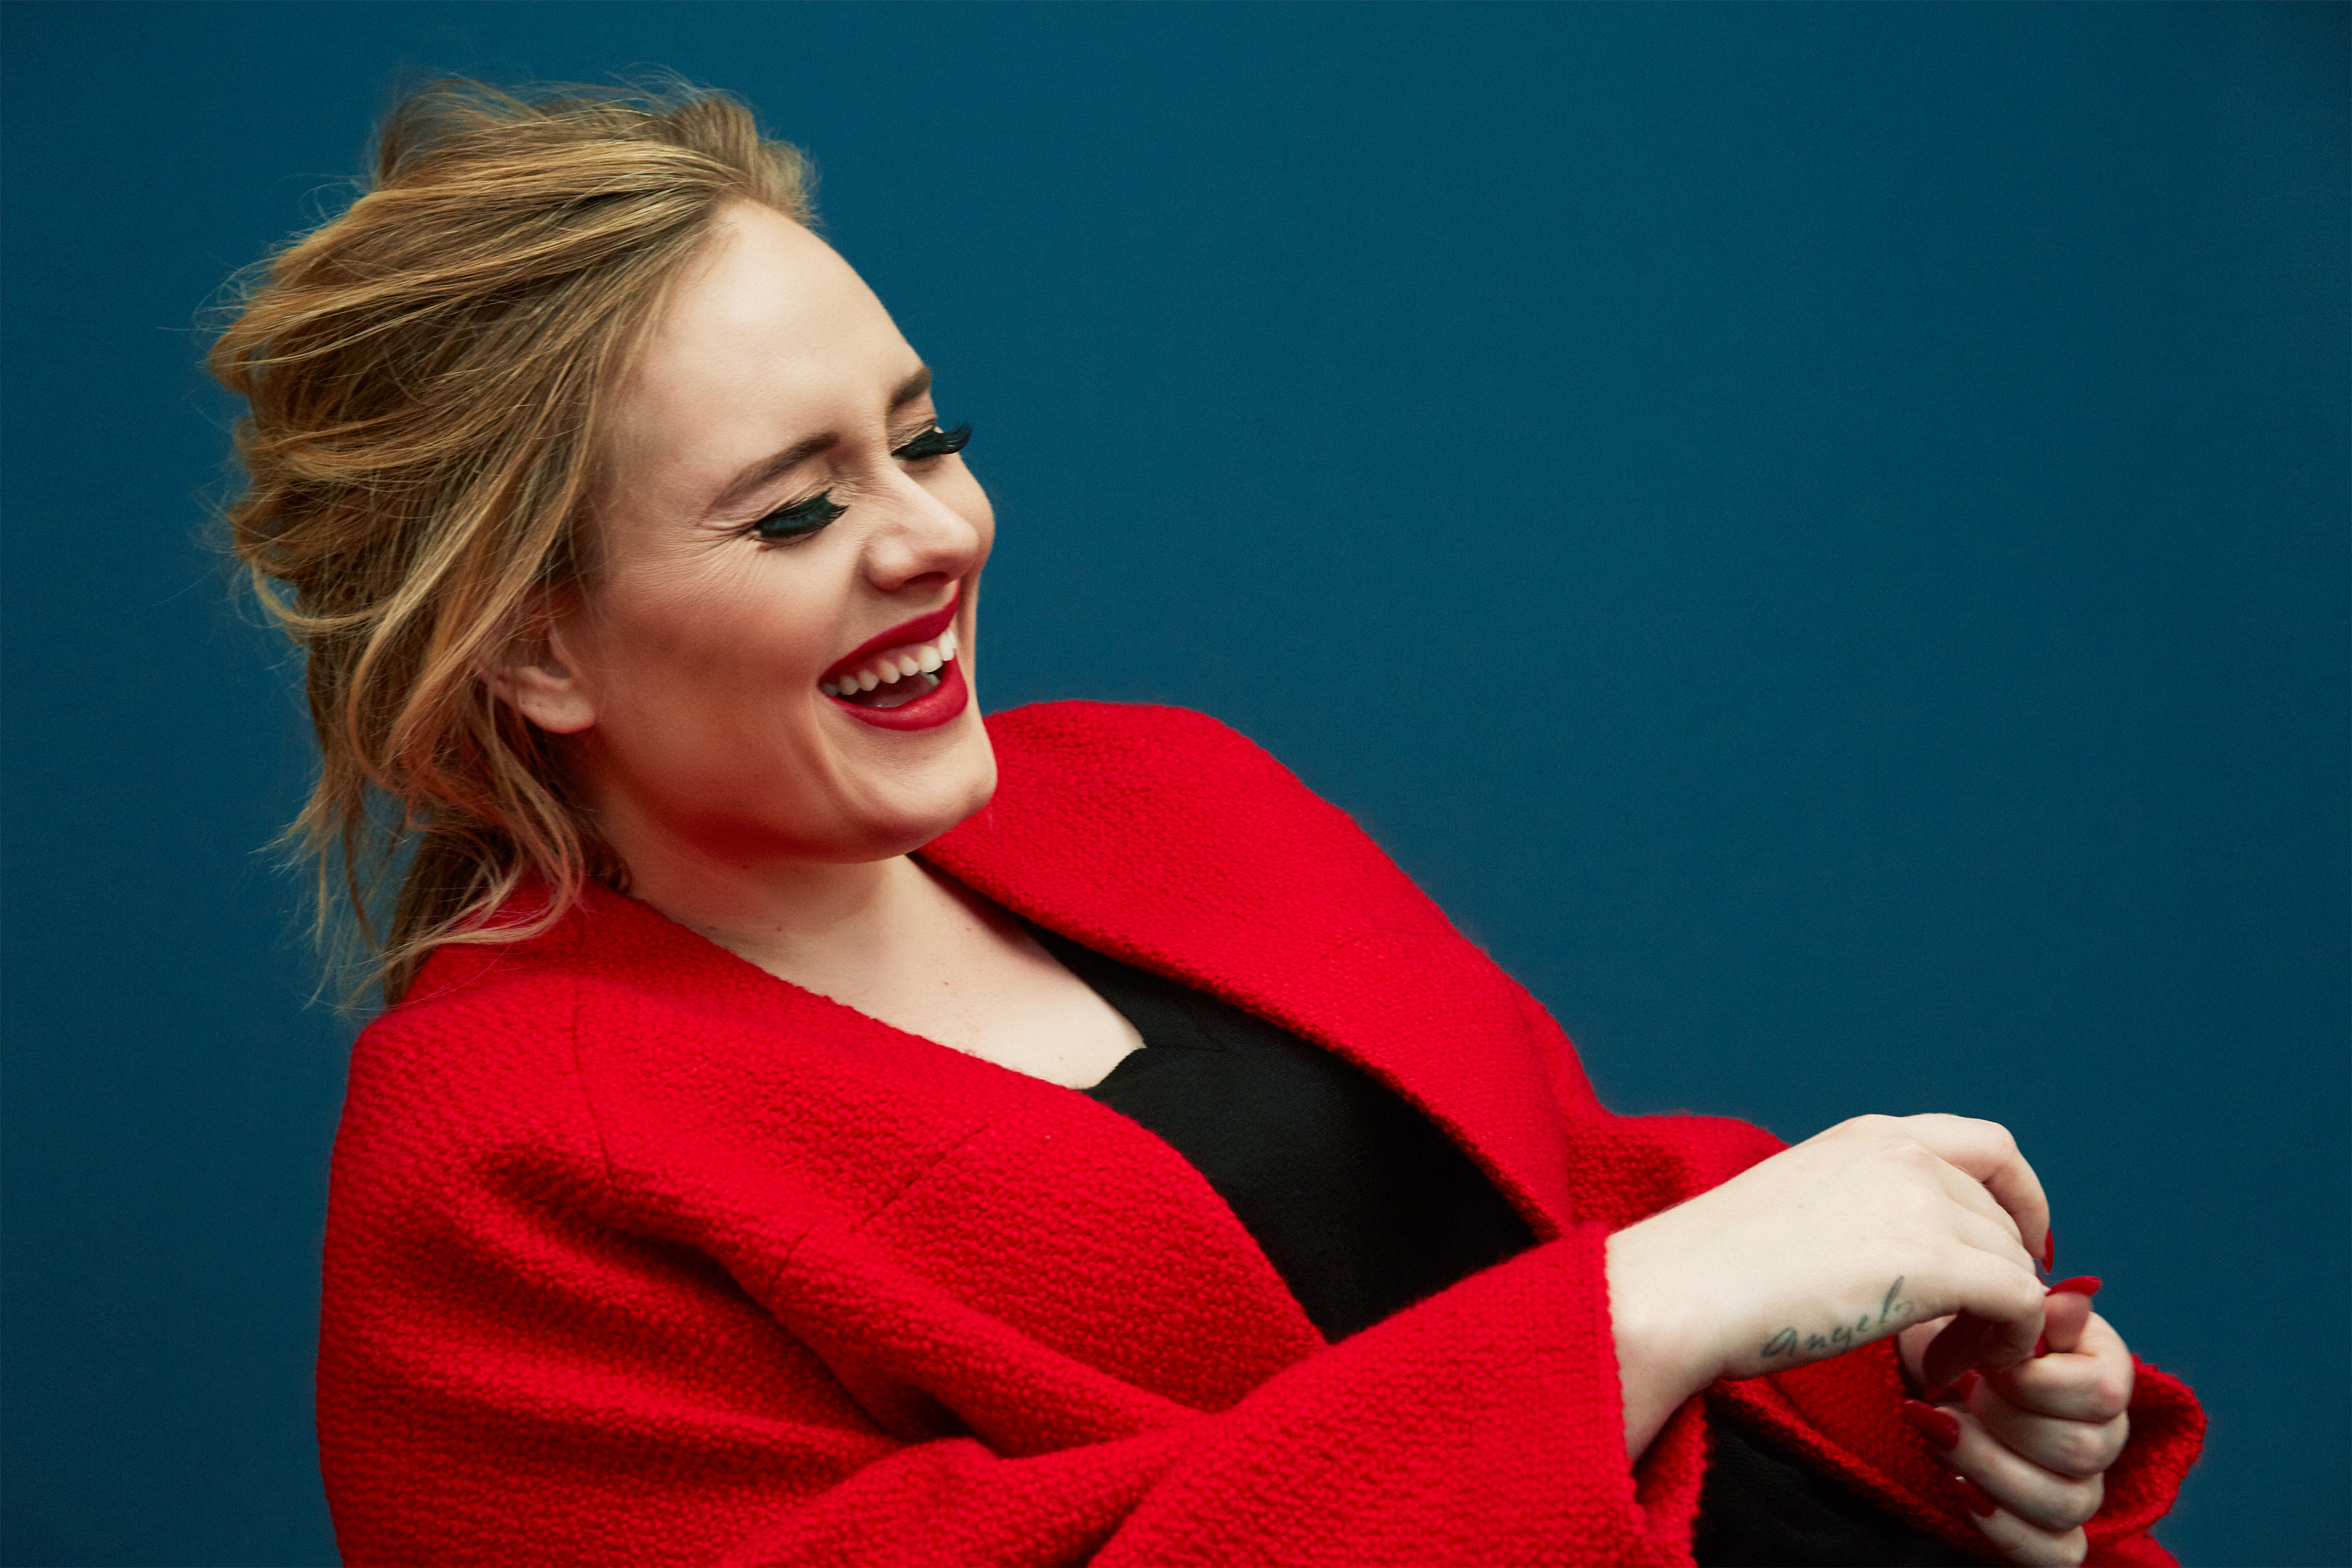 British singer Adele is photographed in New York City on Nov. 19, 2015.